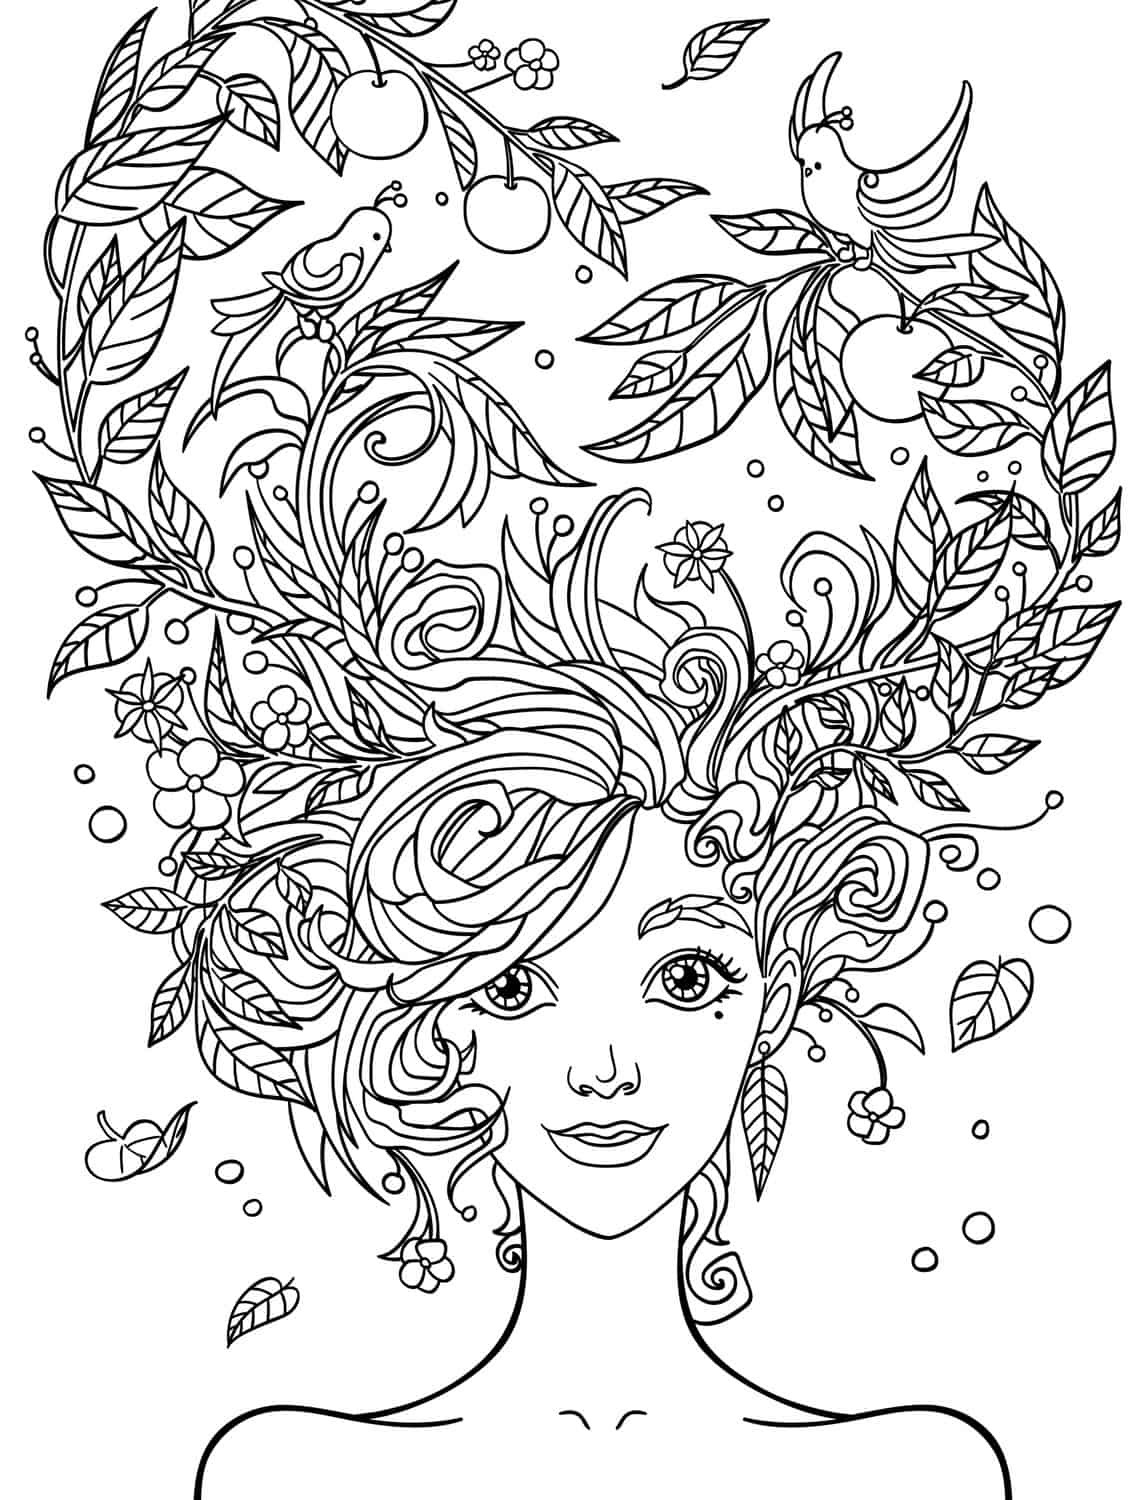 Coloring Pages For Adults Girls
 10 Crazy Hair Adult Coloring Pages Page 5 of 12 Nerdy